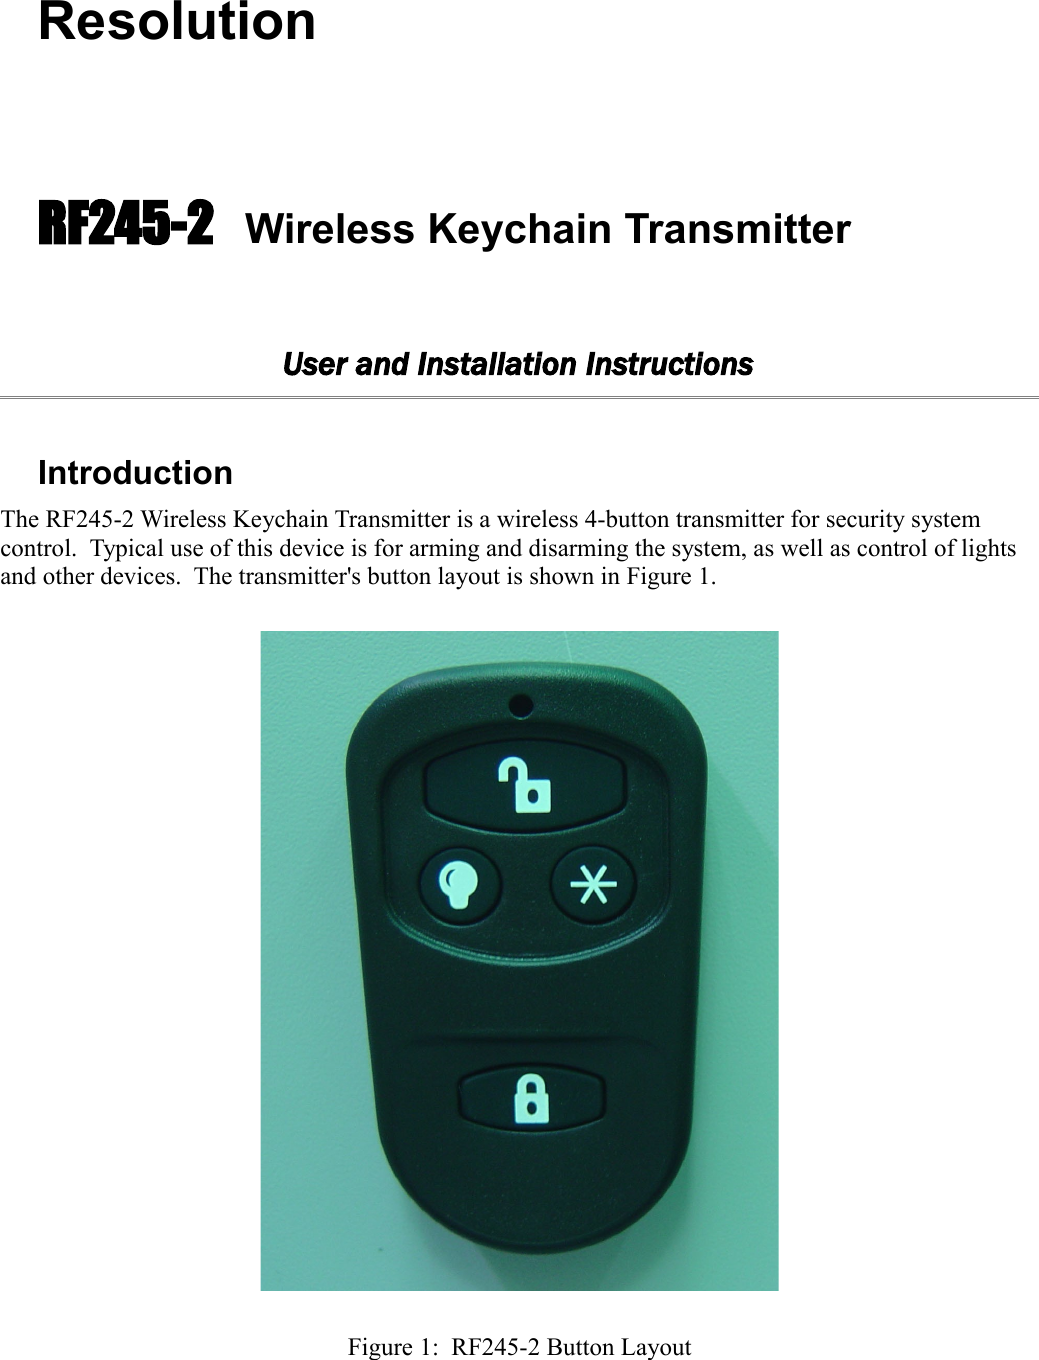 ResolutionRF245-2   Wireless Keychain TransmitterUser and Installation InstructionsIntroductionThe RF245-2 Wireless Keychain Transmitter is a wireless 4-button transmitter for security system control.  Typical use of this device is for arming and disarming the system, as well as control of lights and other devices.  The transmitter&apos;s button layout is shown in Figure 1.Figure 1:  RF245-2 Button Layout